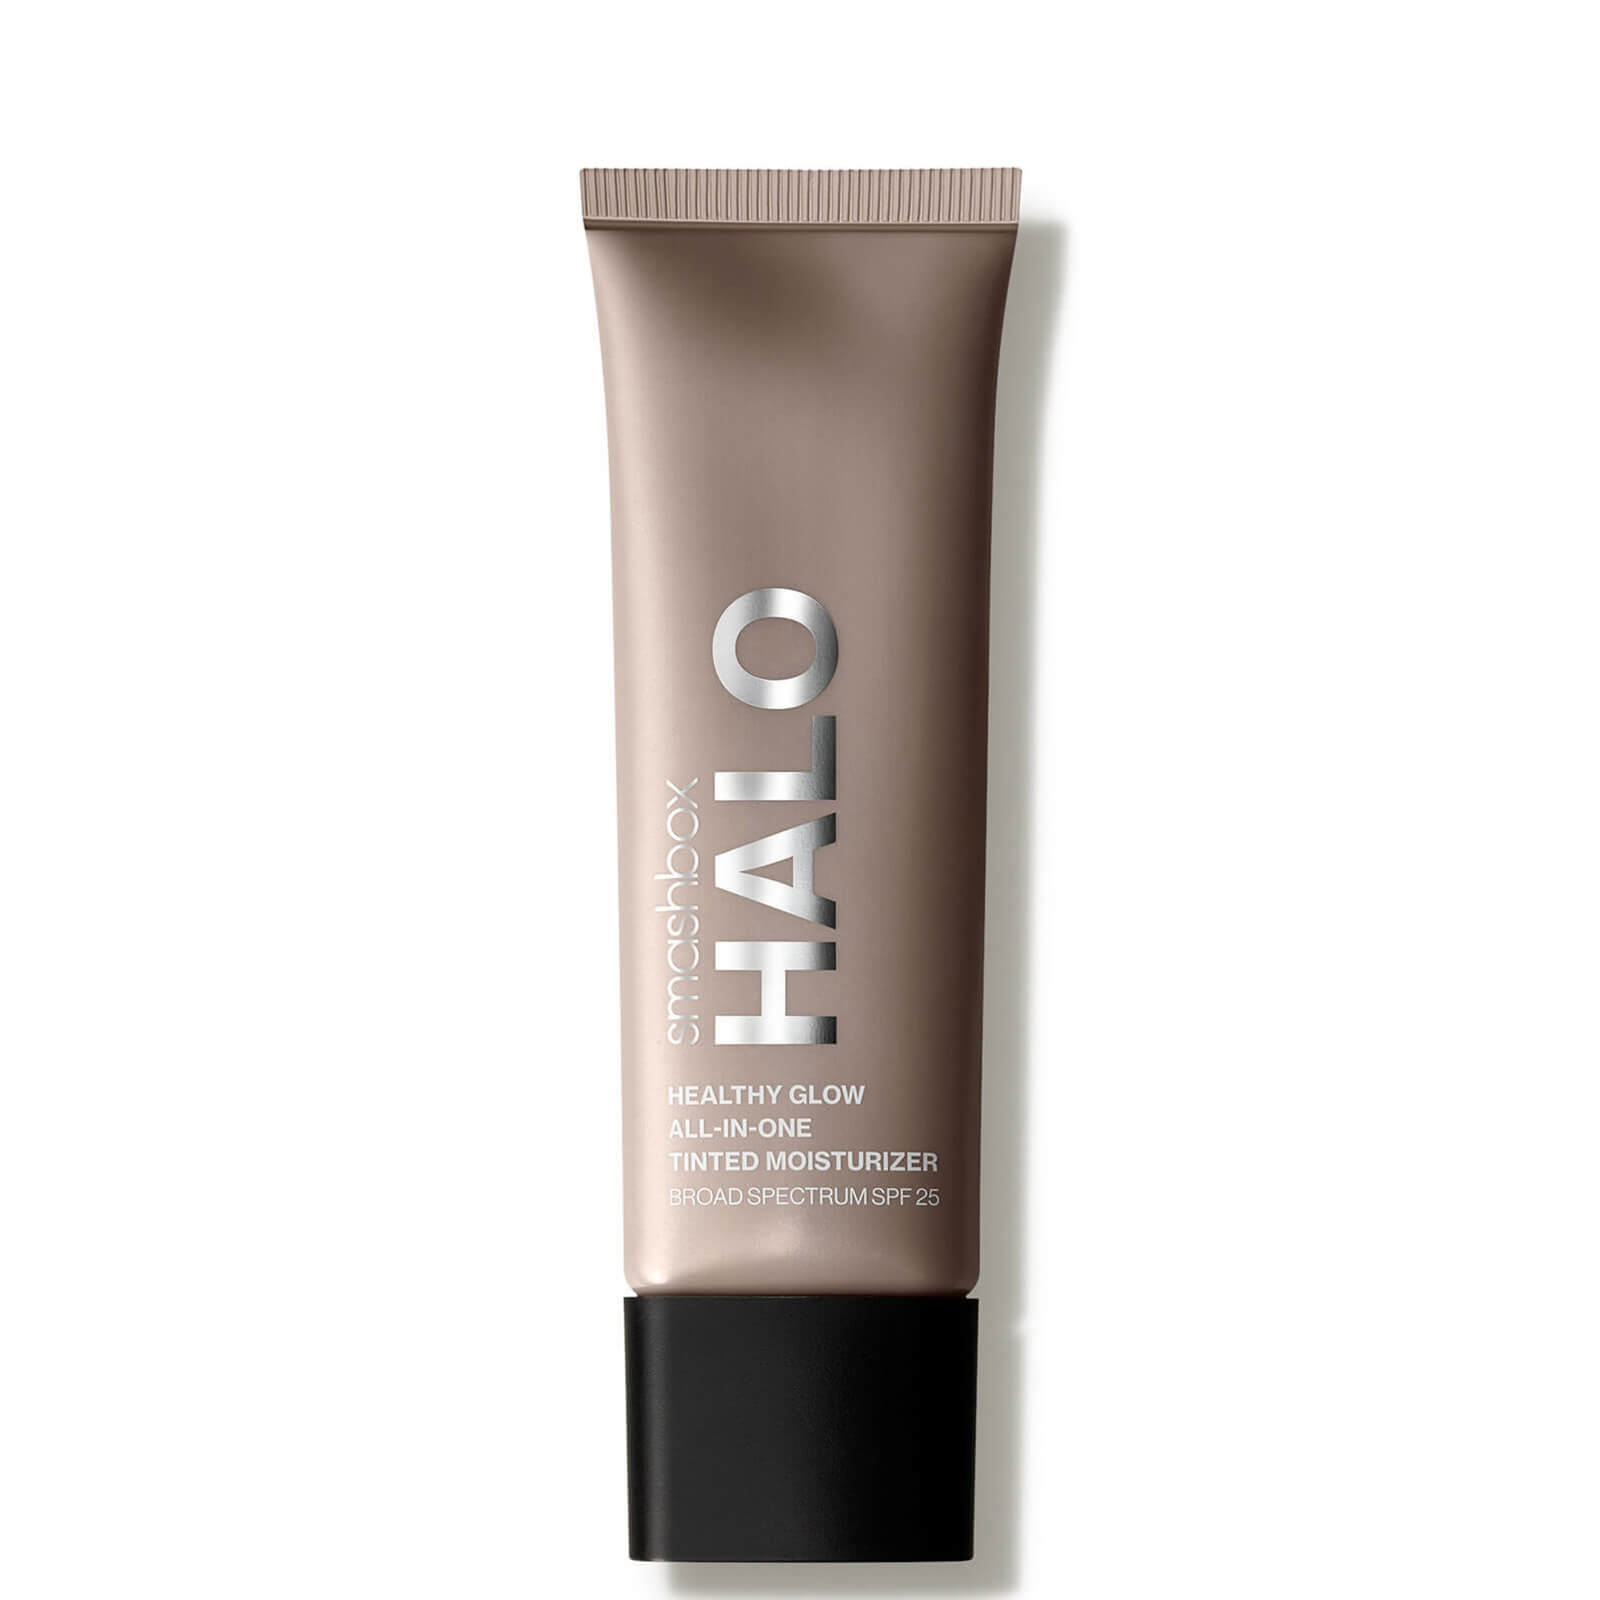 Image of Smashbox Halo Healthy Glow All-in-One SPF25 Tinted Moisturiser 40ml (Various Shades) - Fair Light